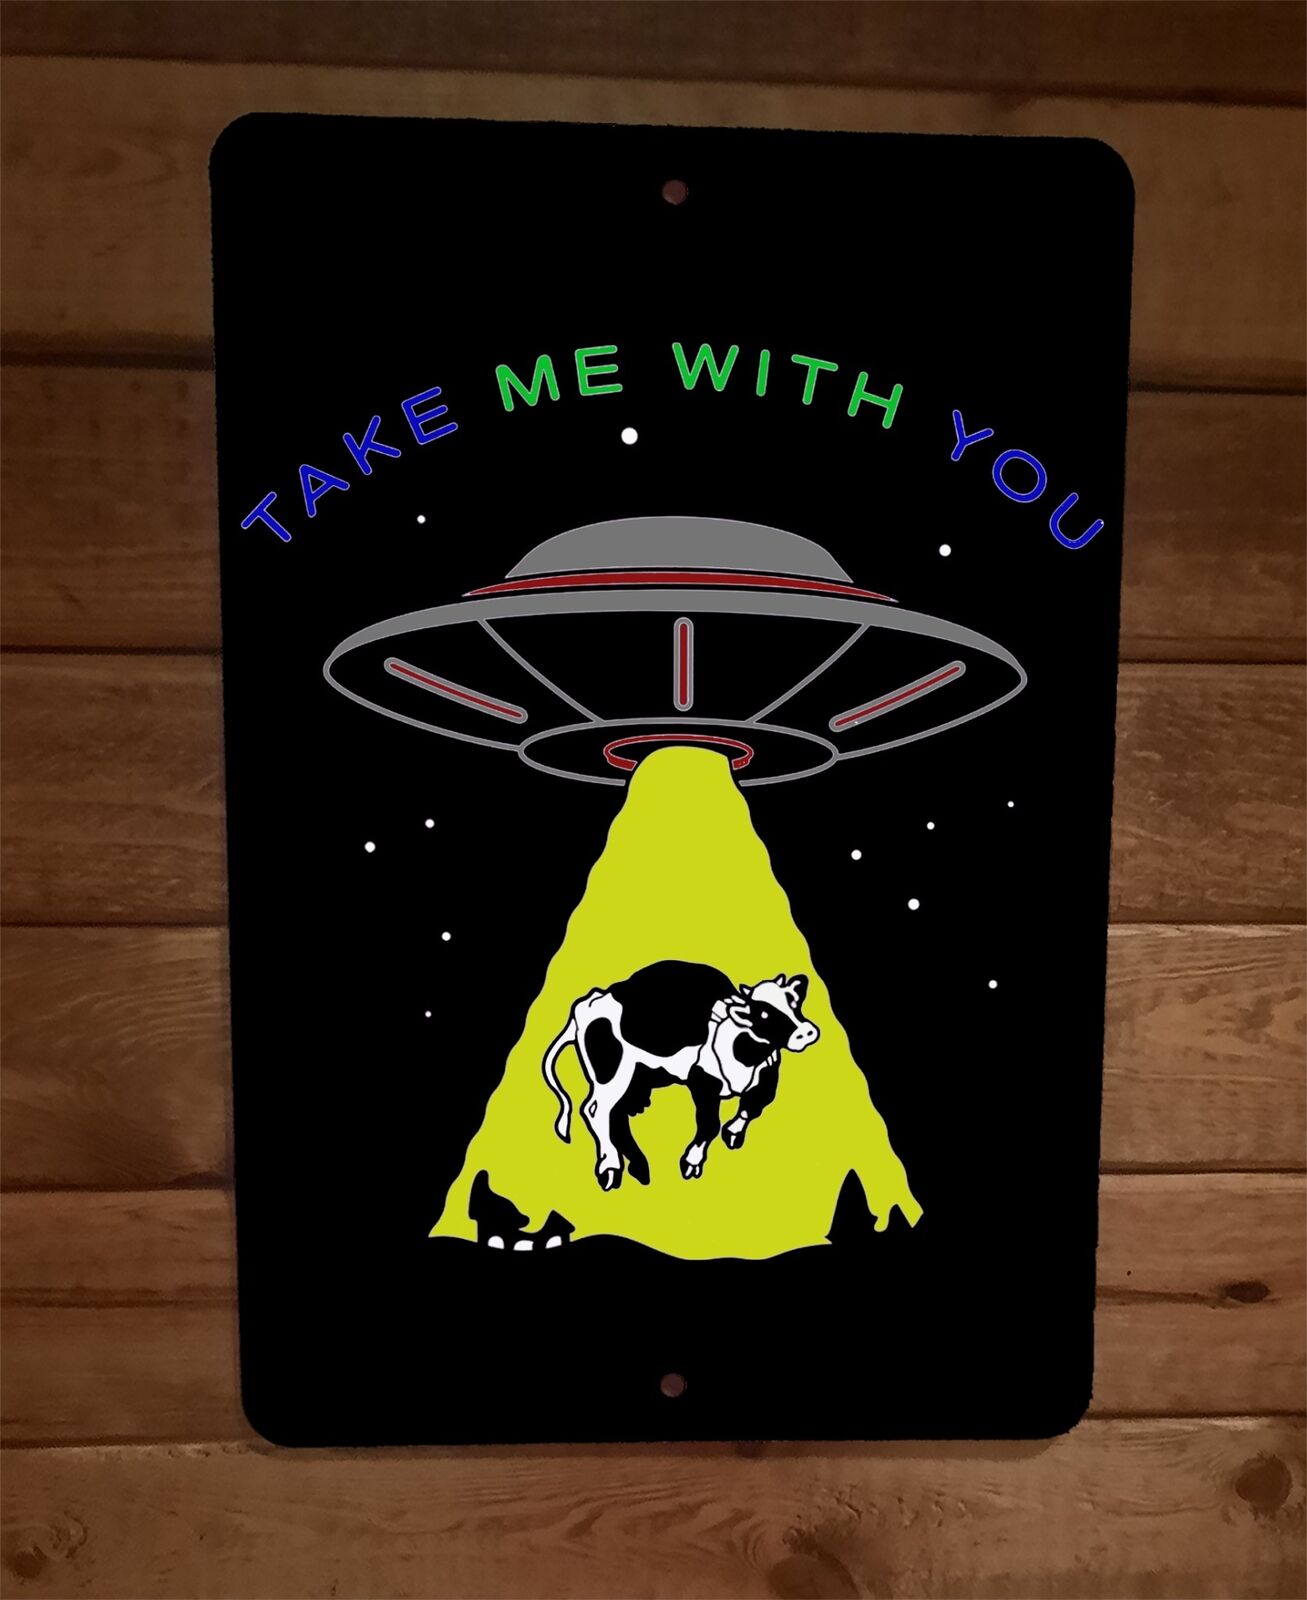 Take Me With You Alien Encounter Abduction Cow 8x12 Metal Wall Sign